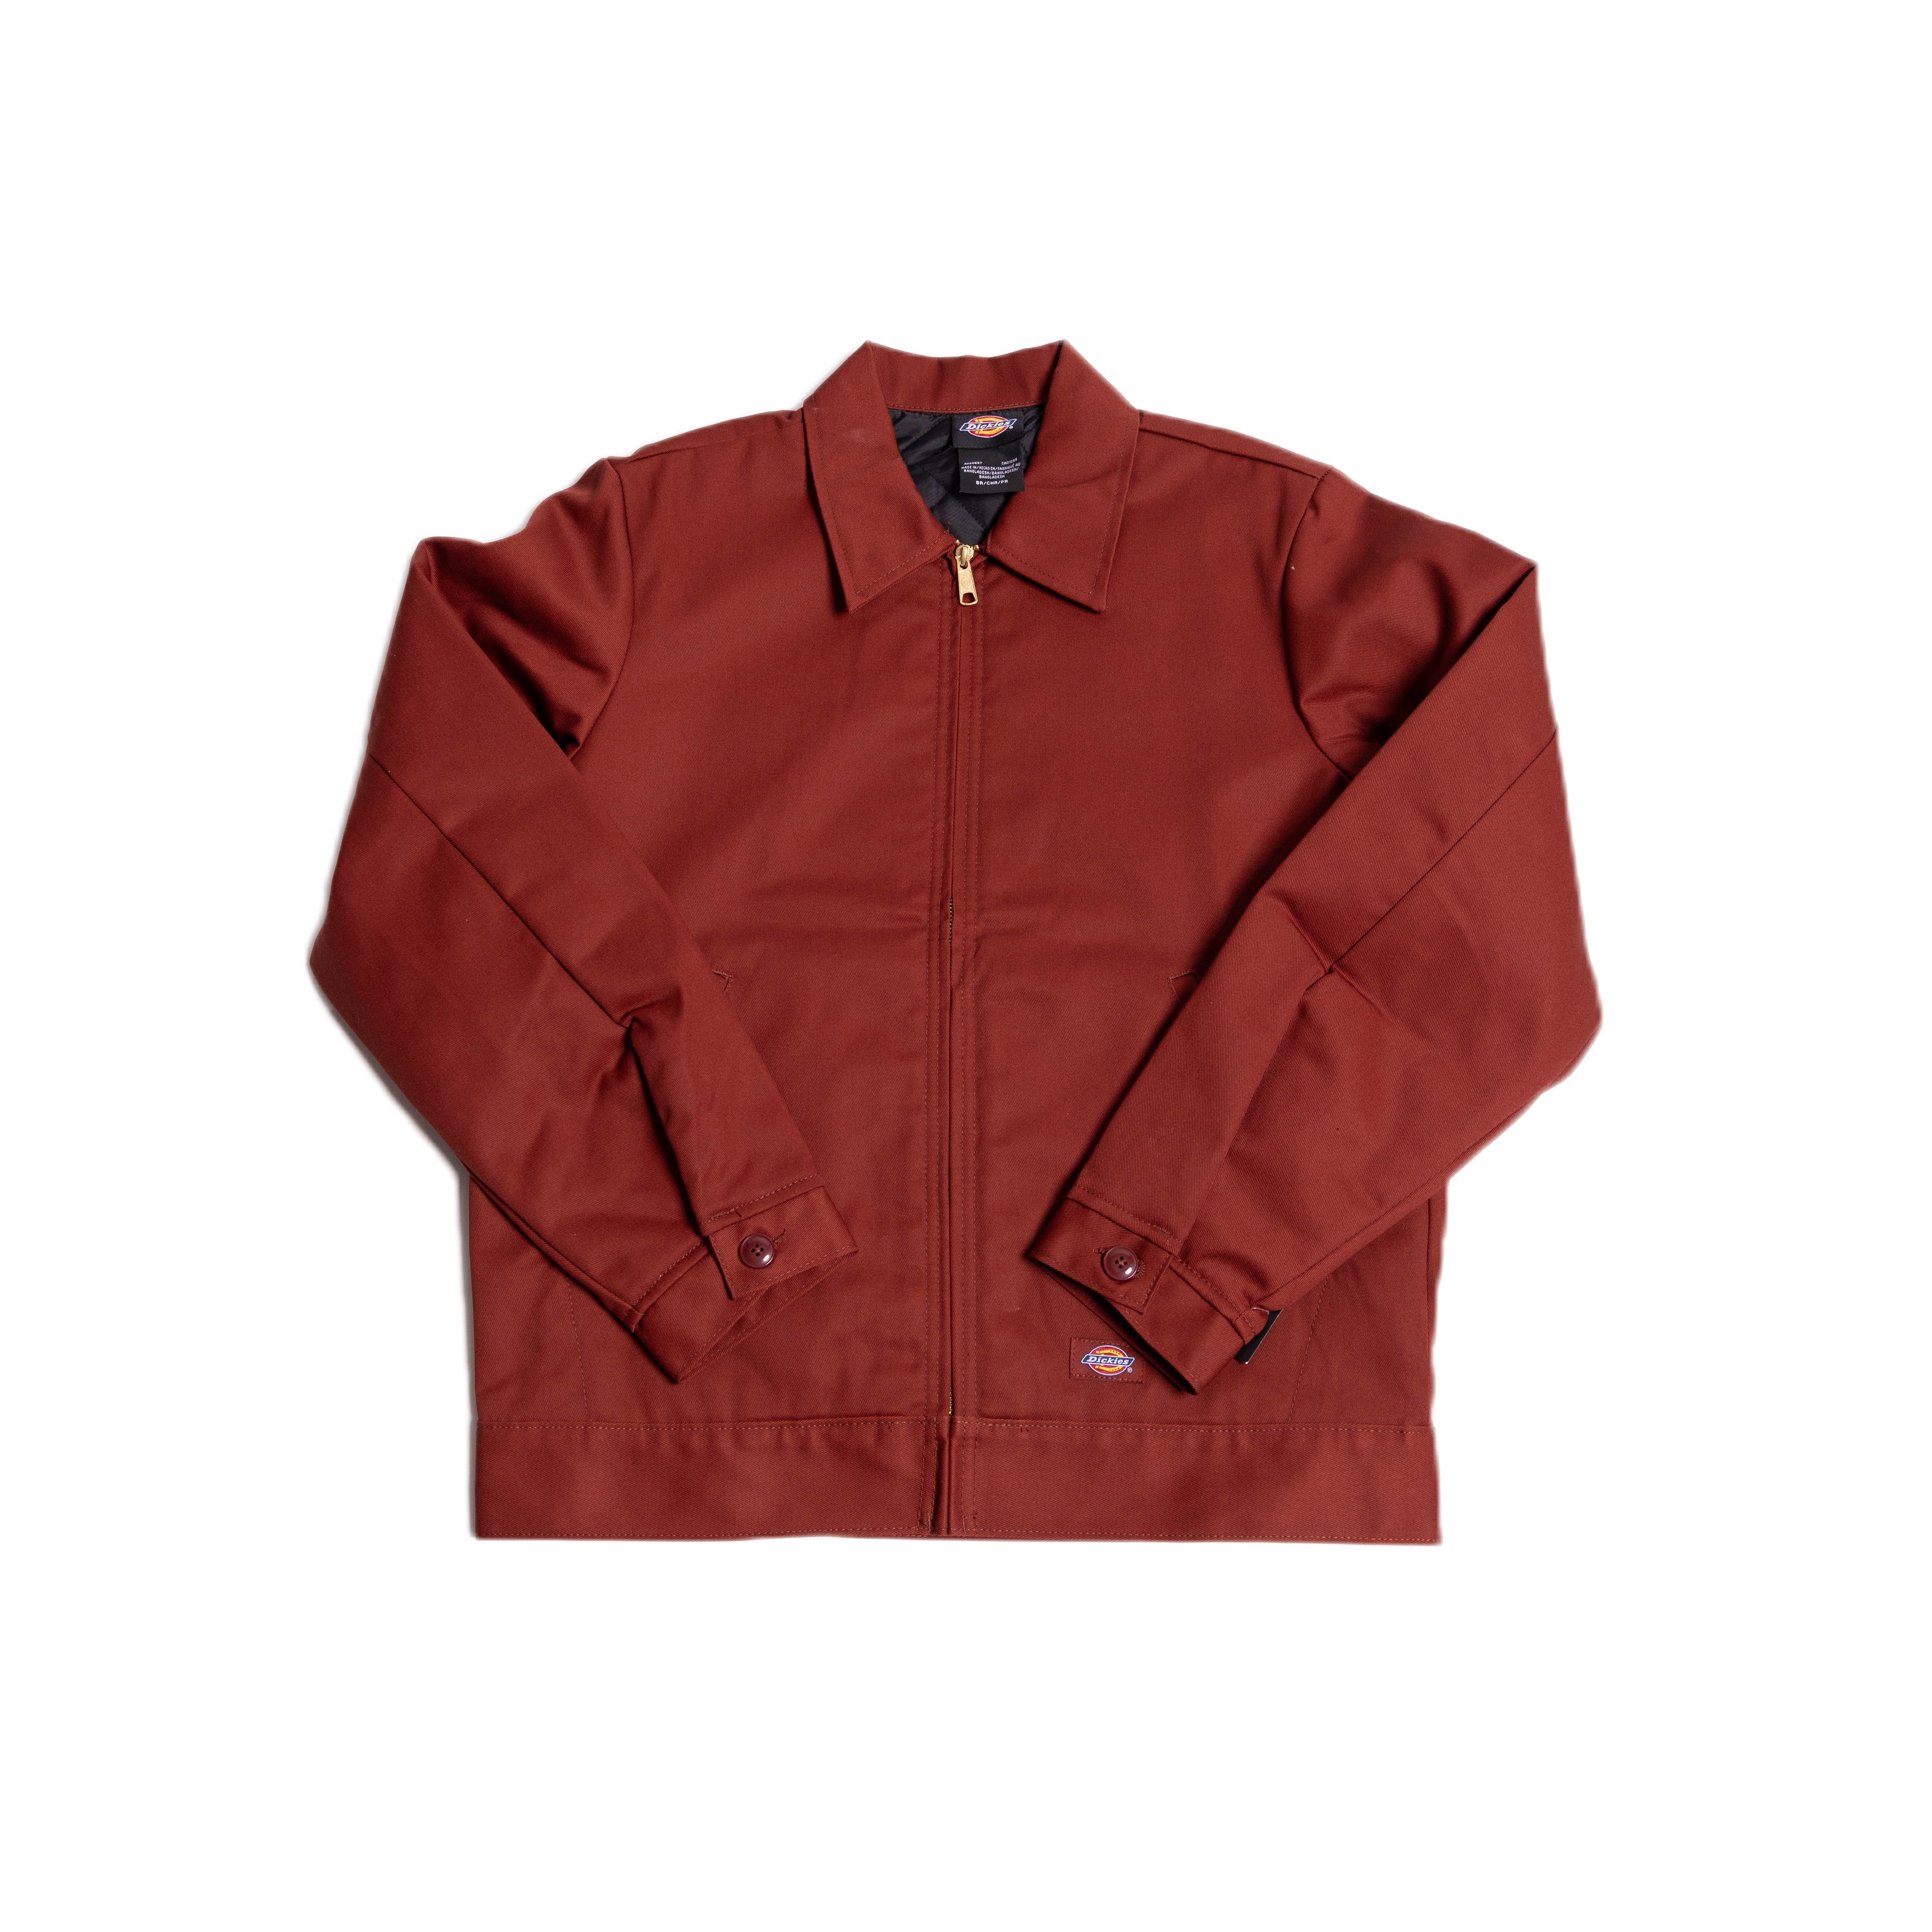 Dickies Insulated Asn Eisenhower Jacket 'Fire Brick' – All The Right